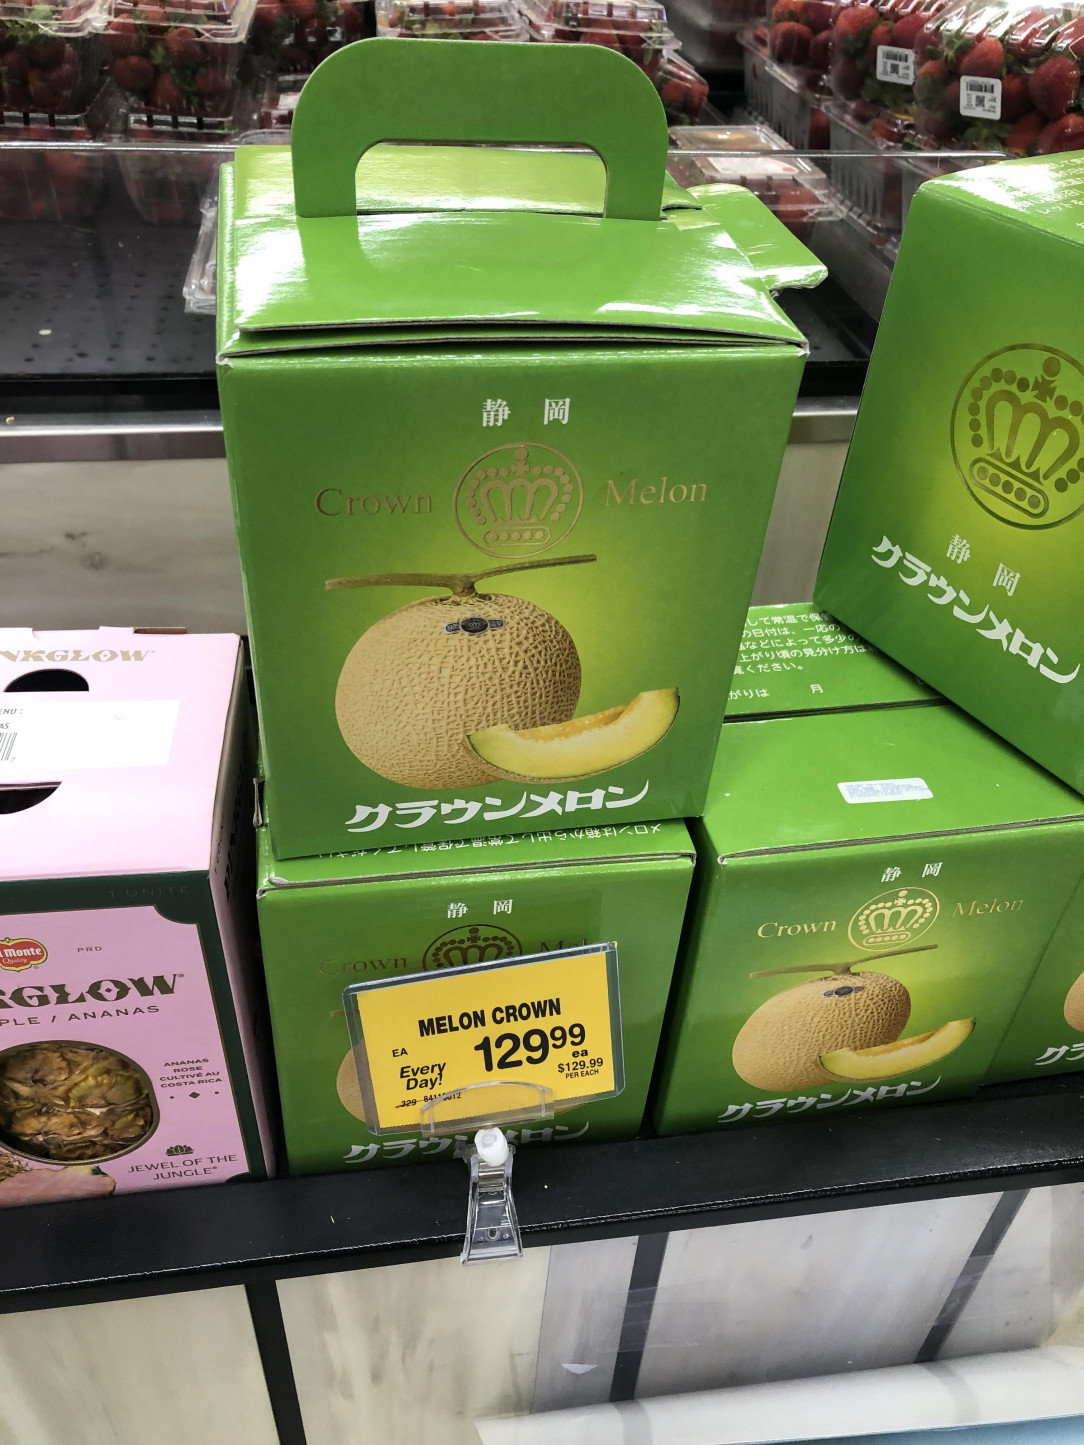 One expensive melon! WTF!